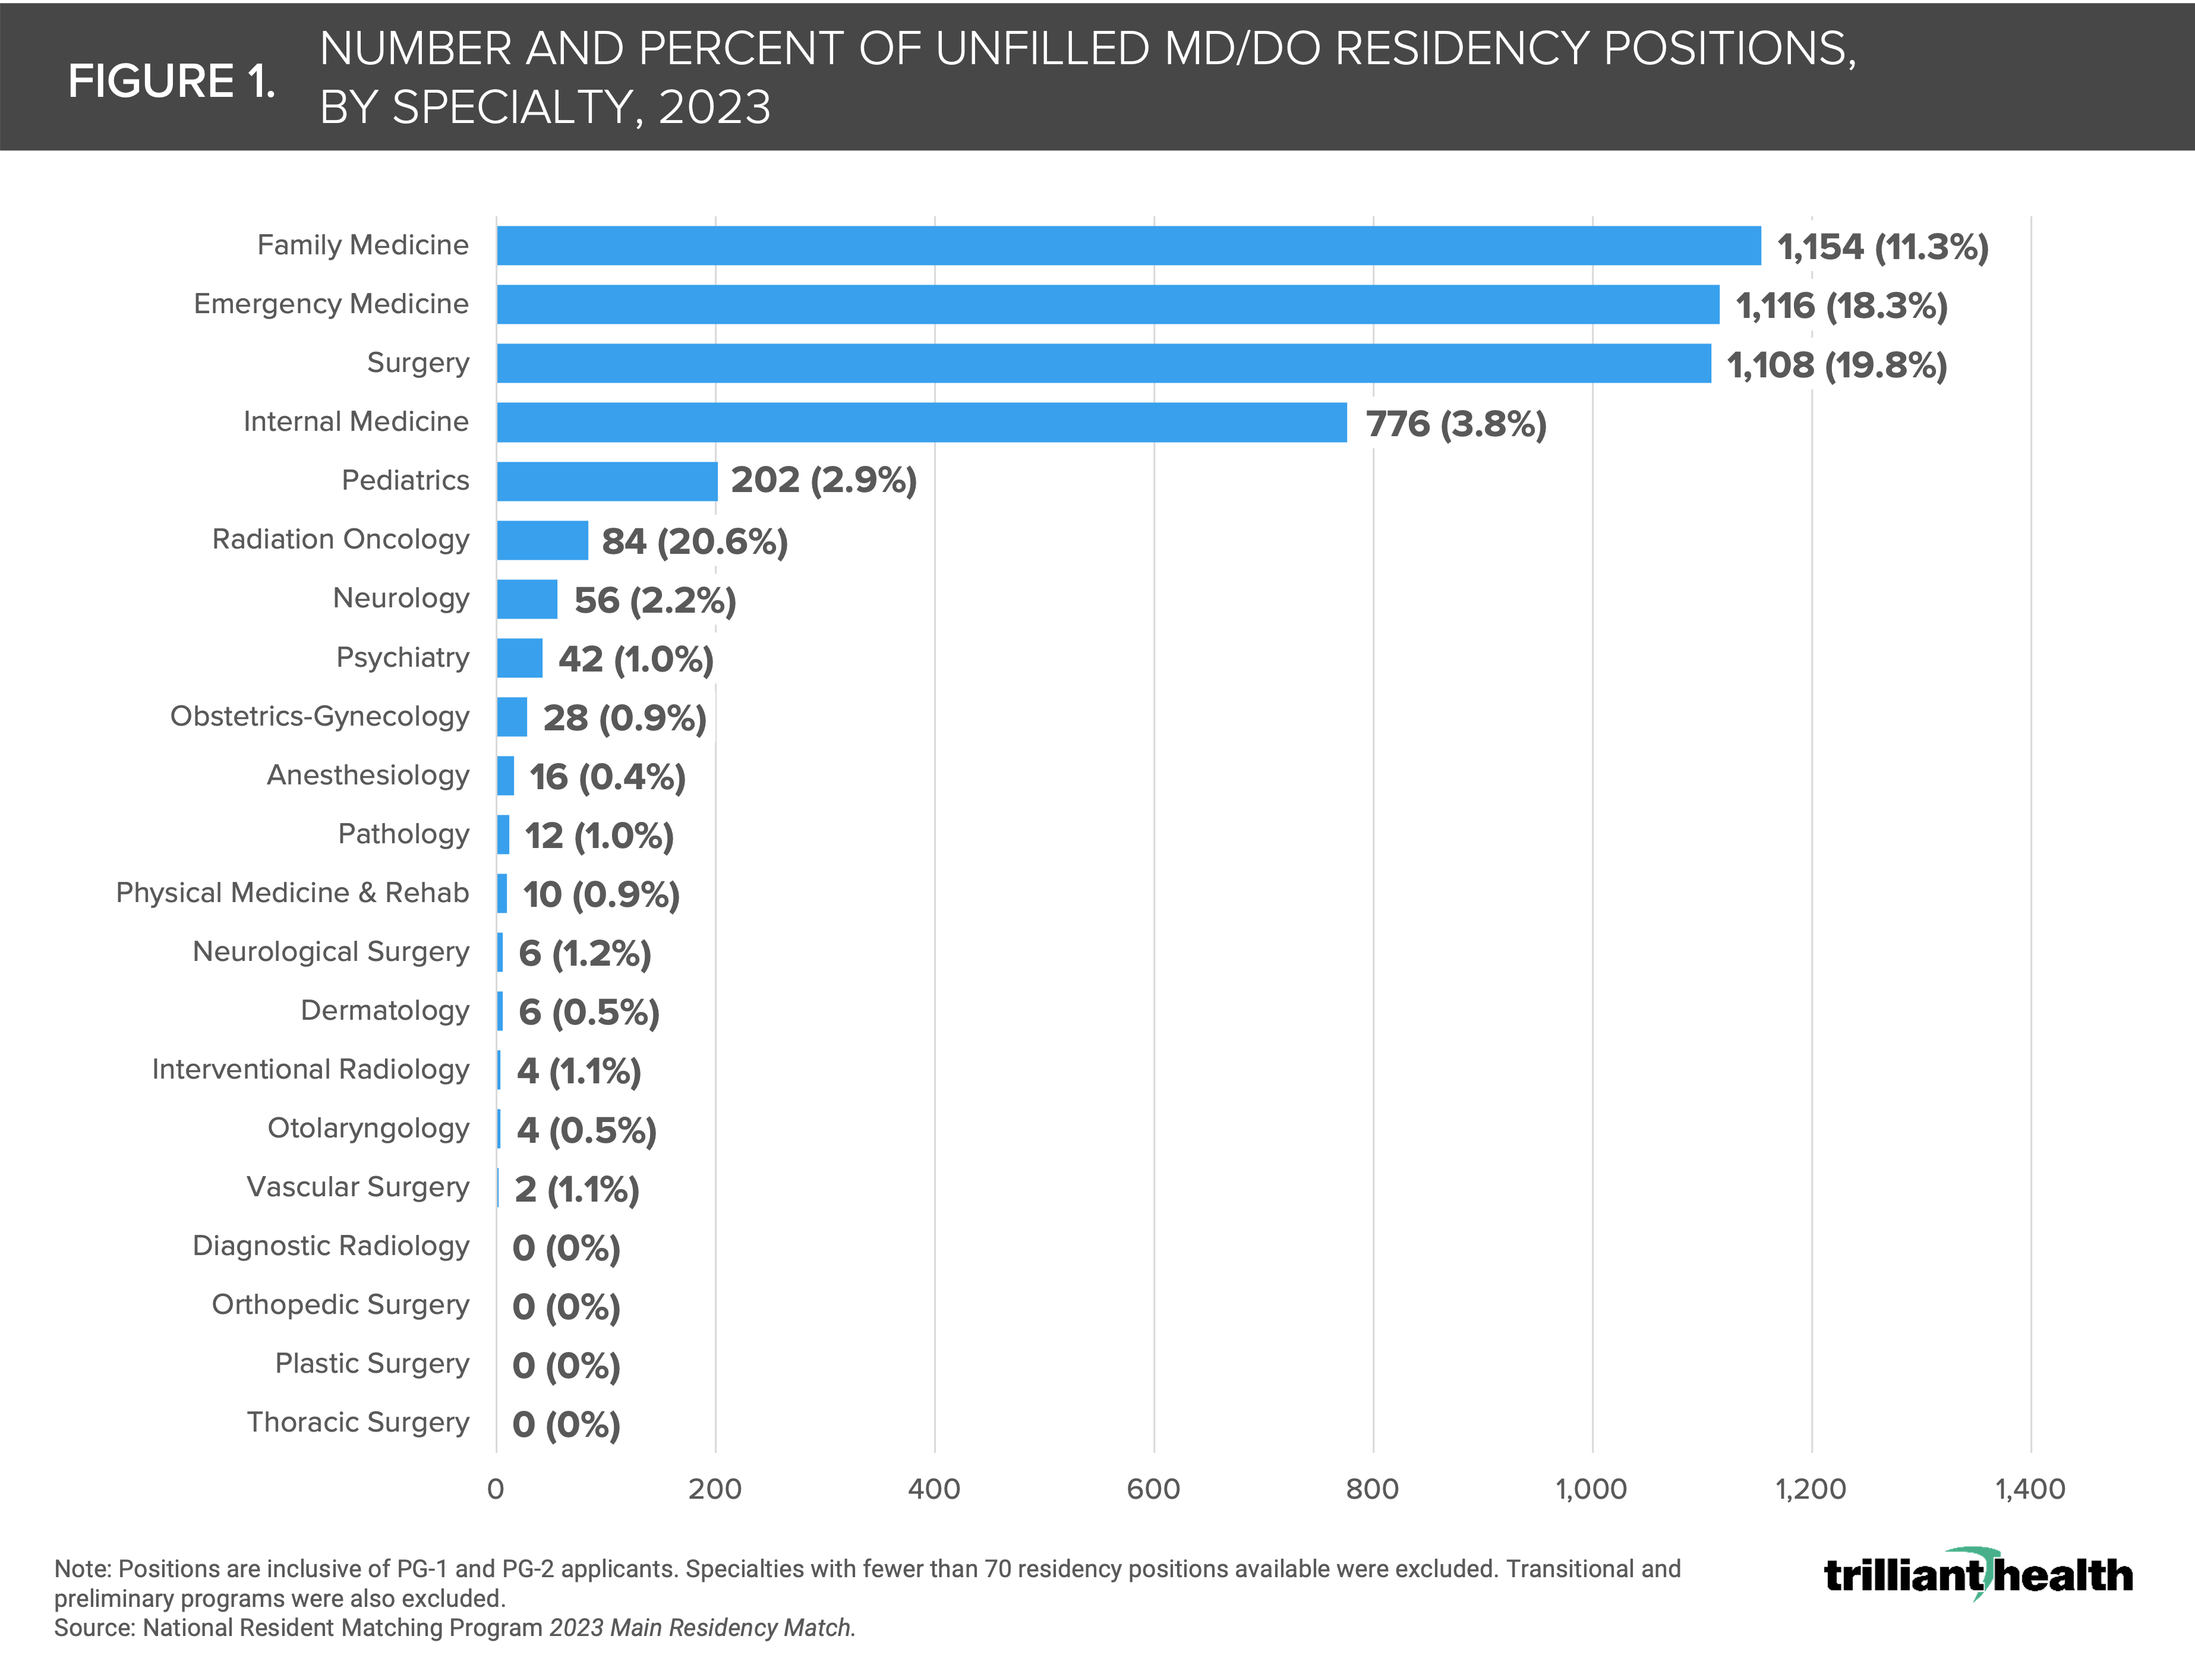 Primary Care and Emergency Medicine Have Highest Number of Unfilled